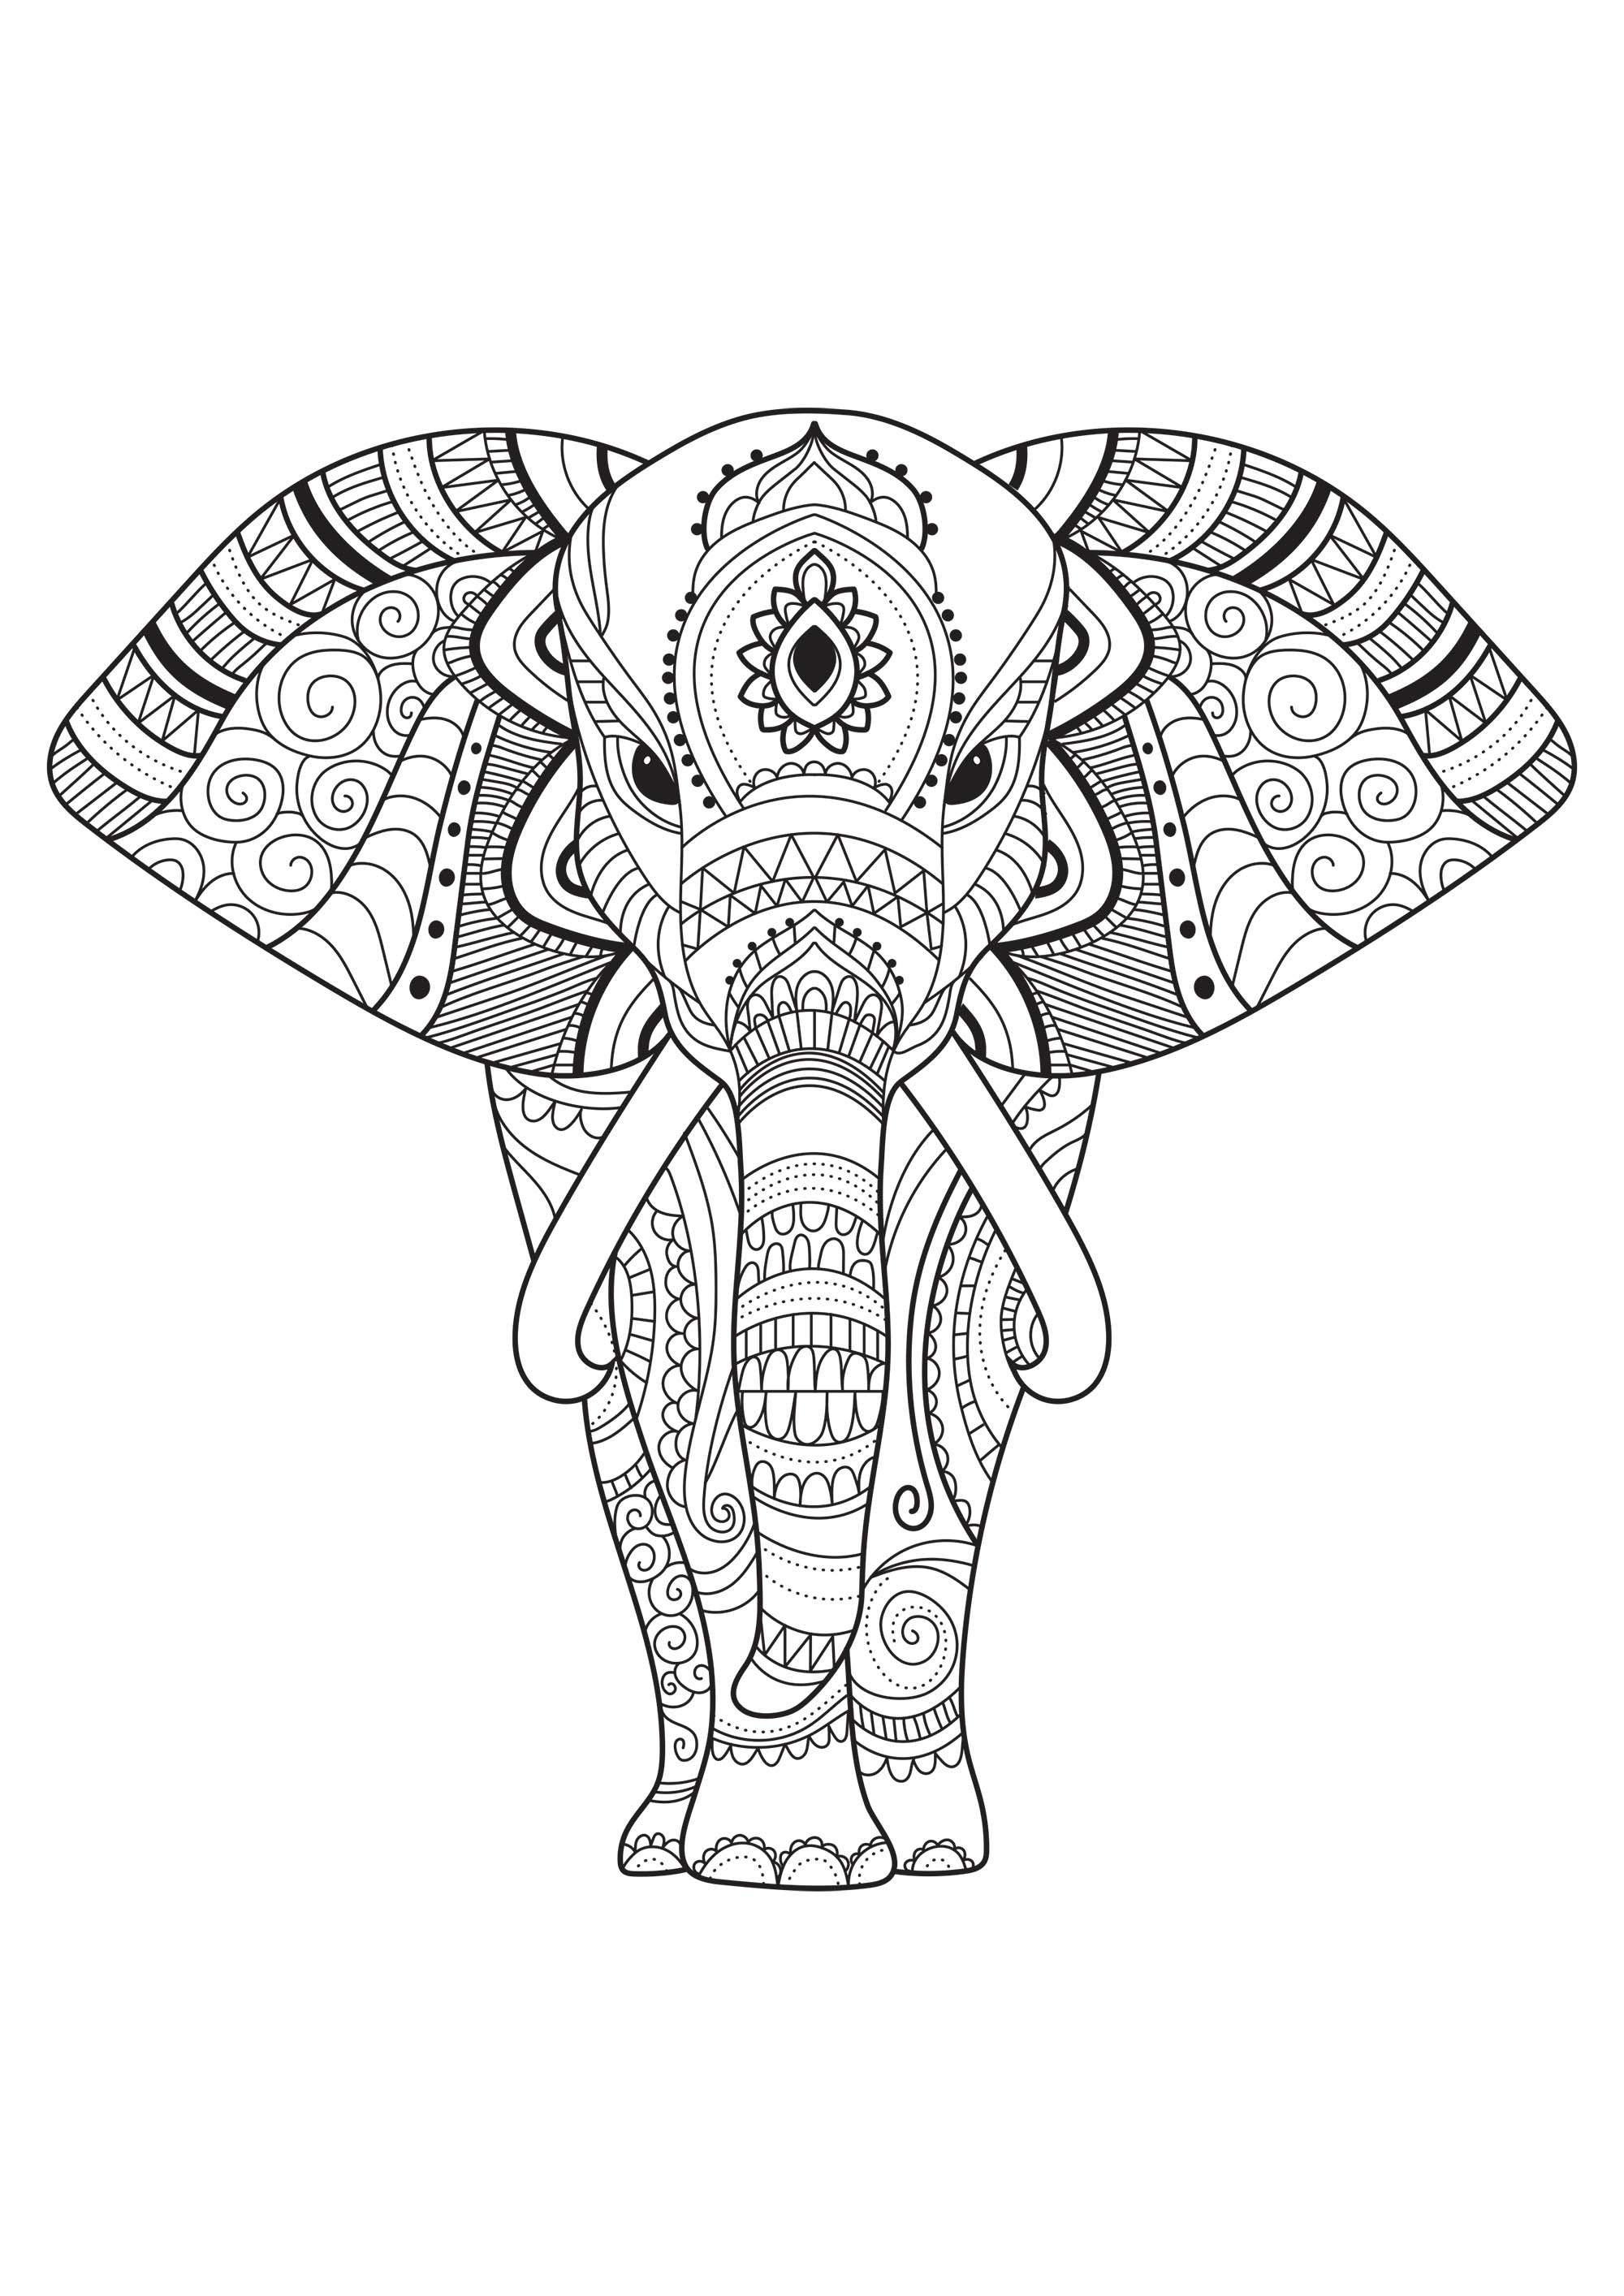 Download Elephant with simple patterns - Elephants Adult Coloring Pages